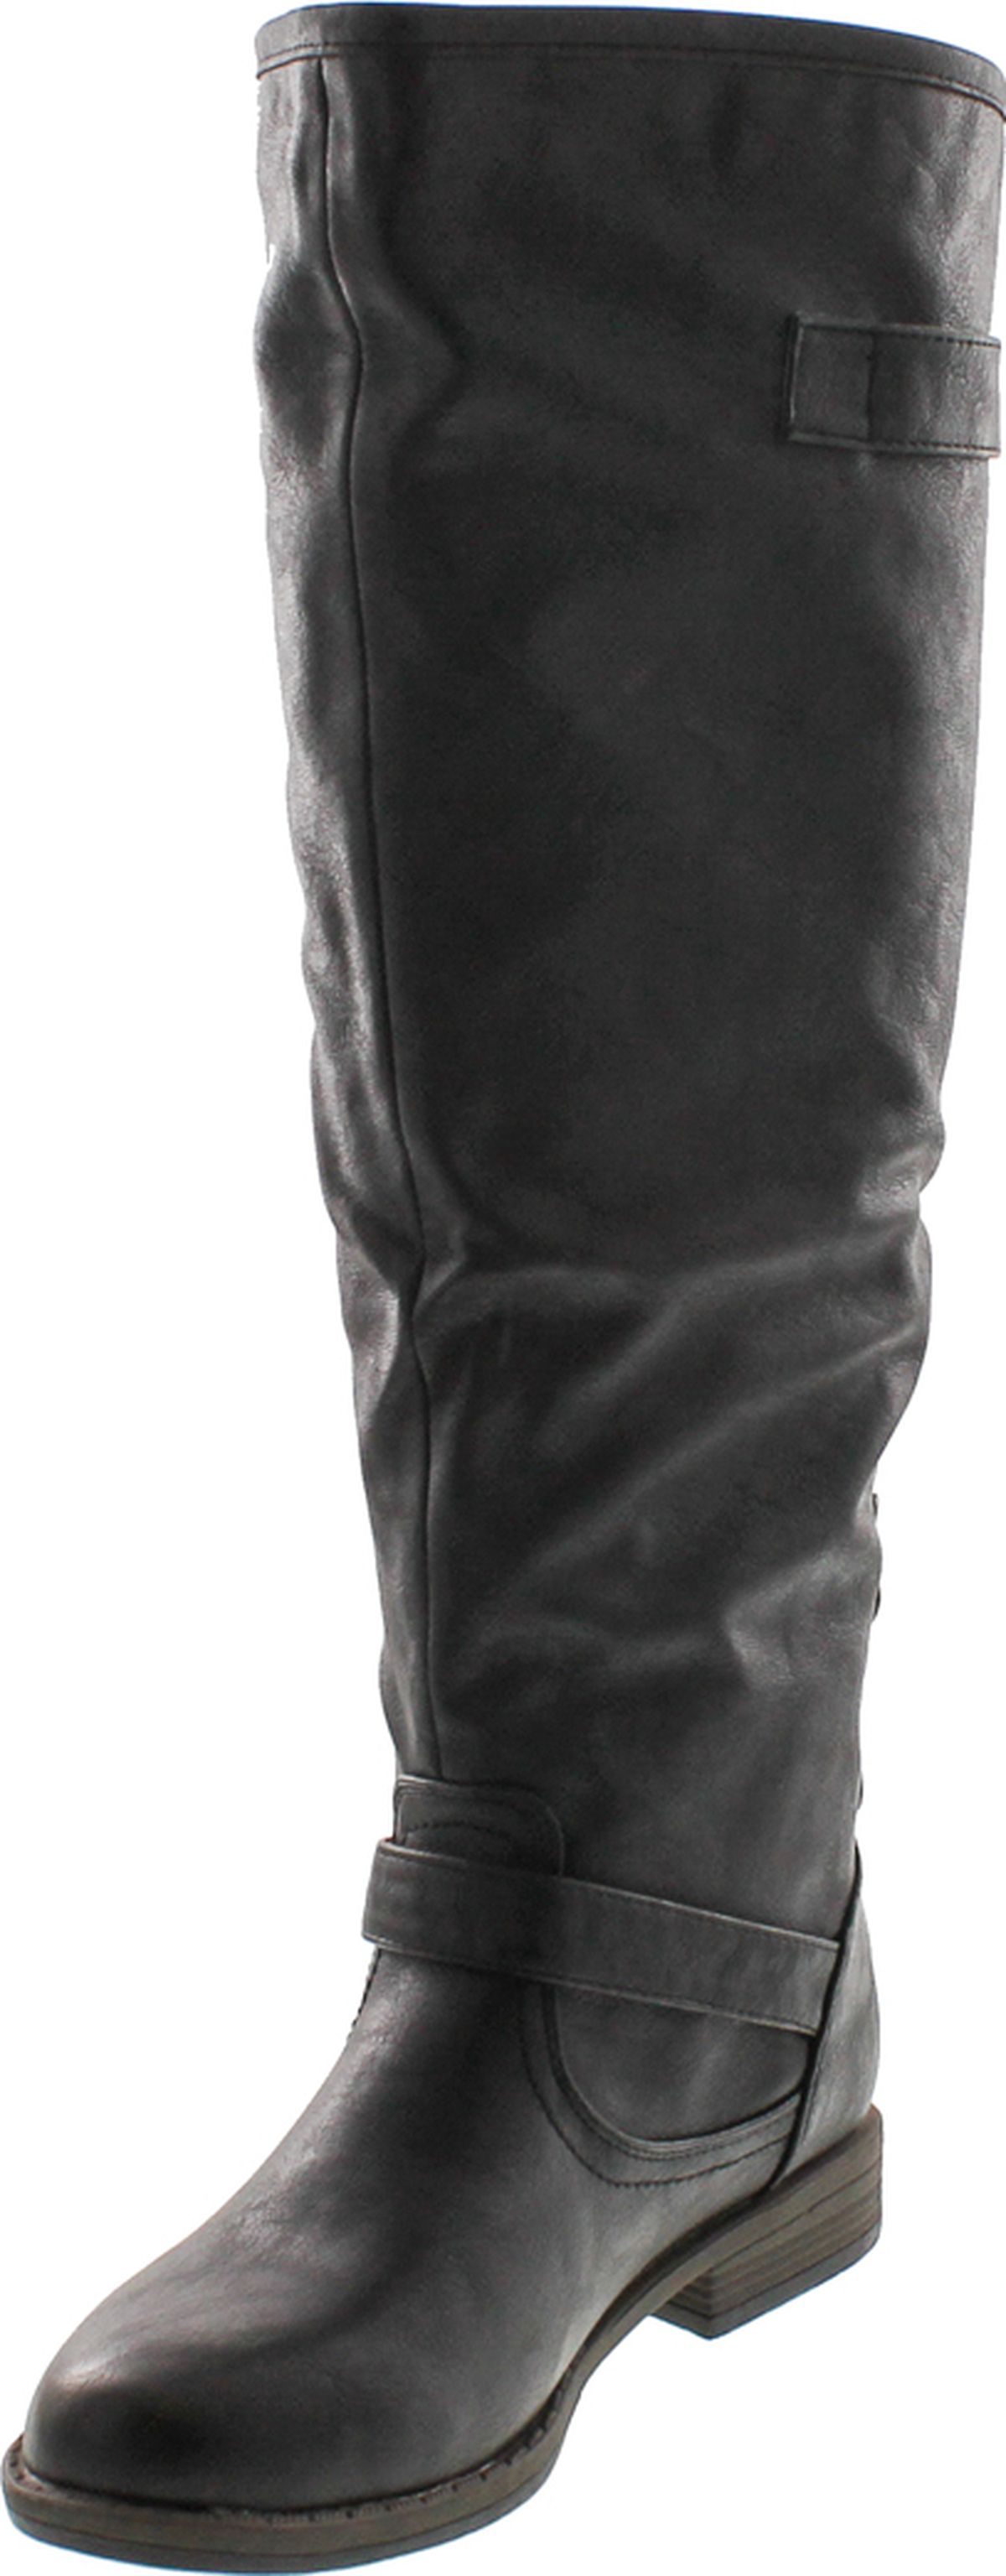 Bamboo Women's Montage 83 Riding Boots with Zipper, Black, 6 - image 3 of 4